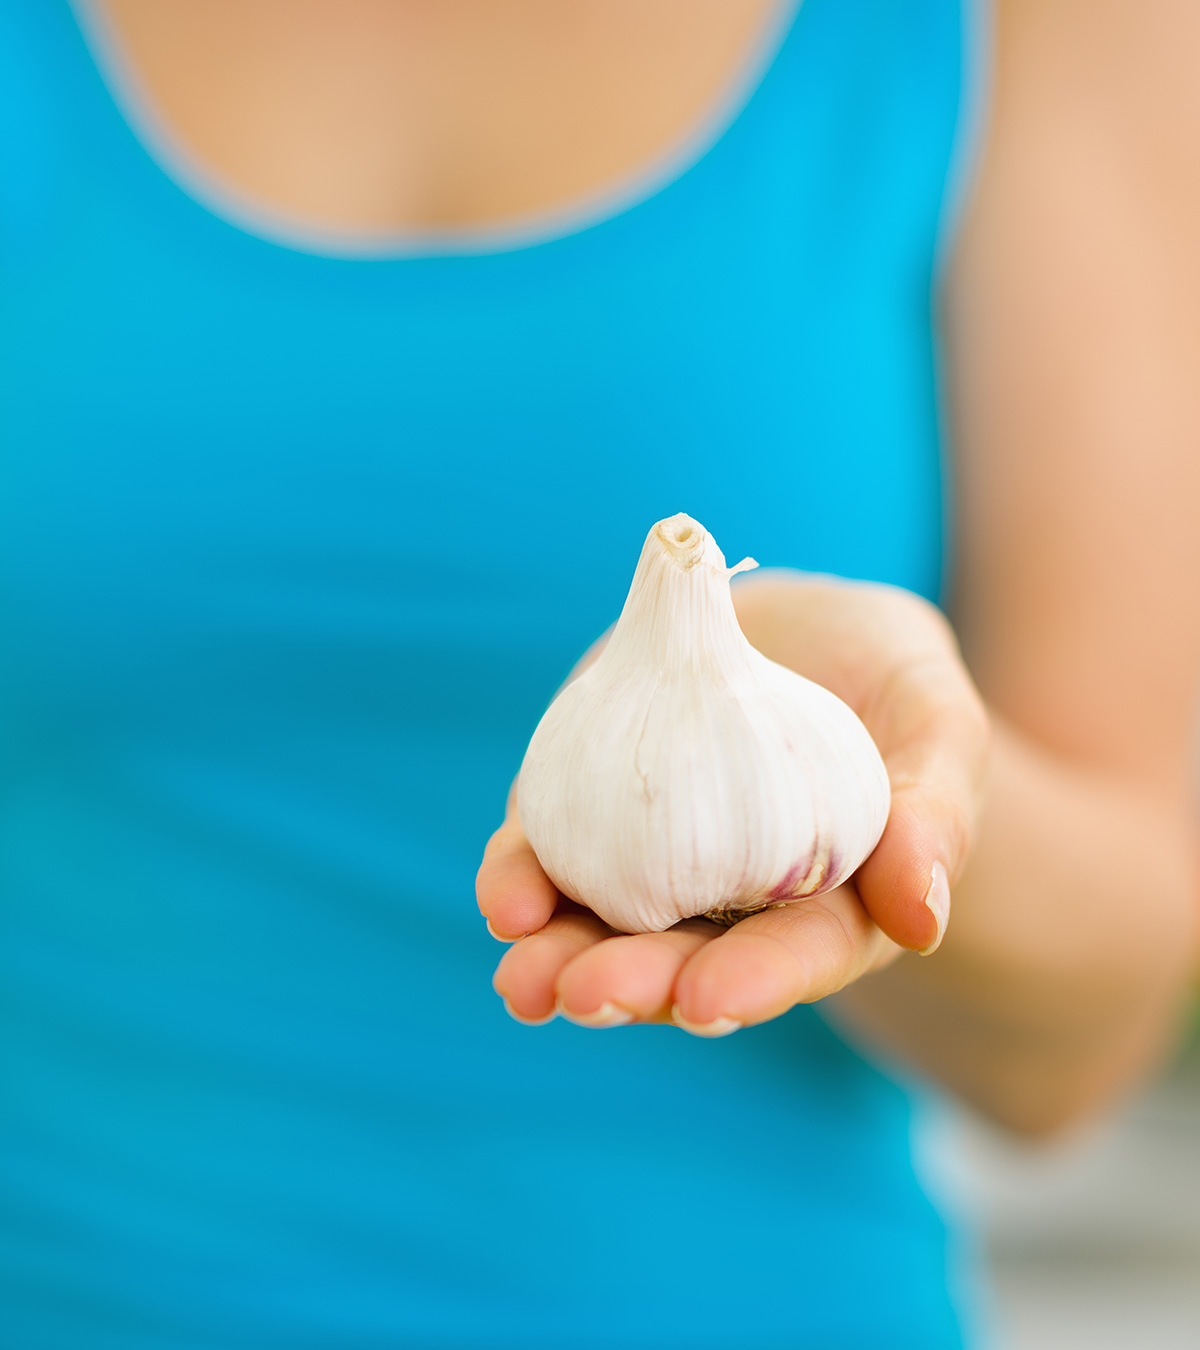 is it safe to eat garlic while breastfeeding?